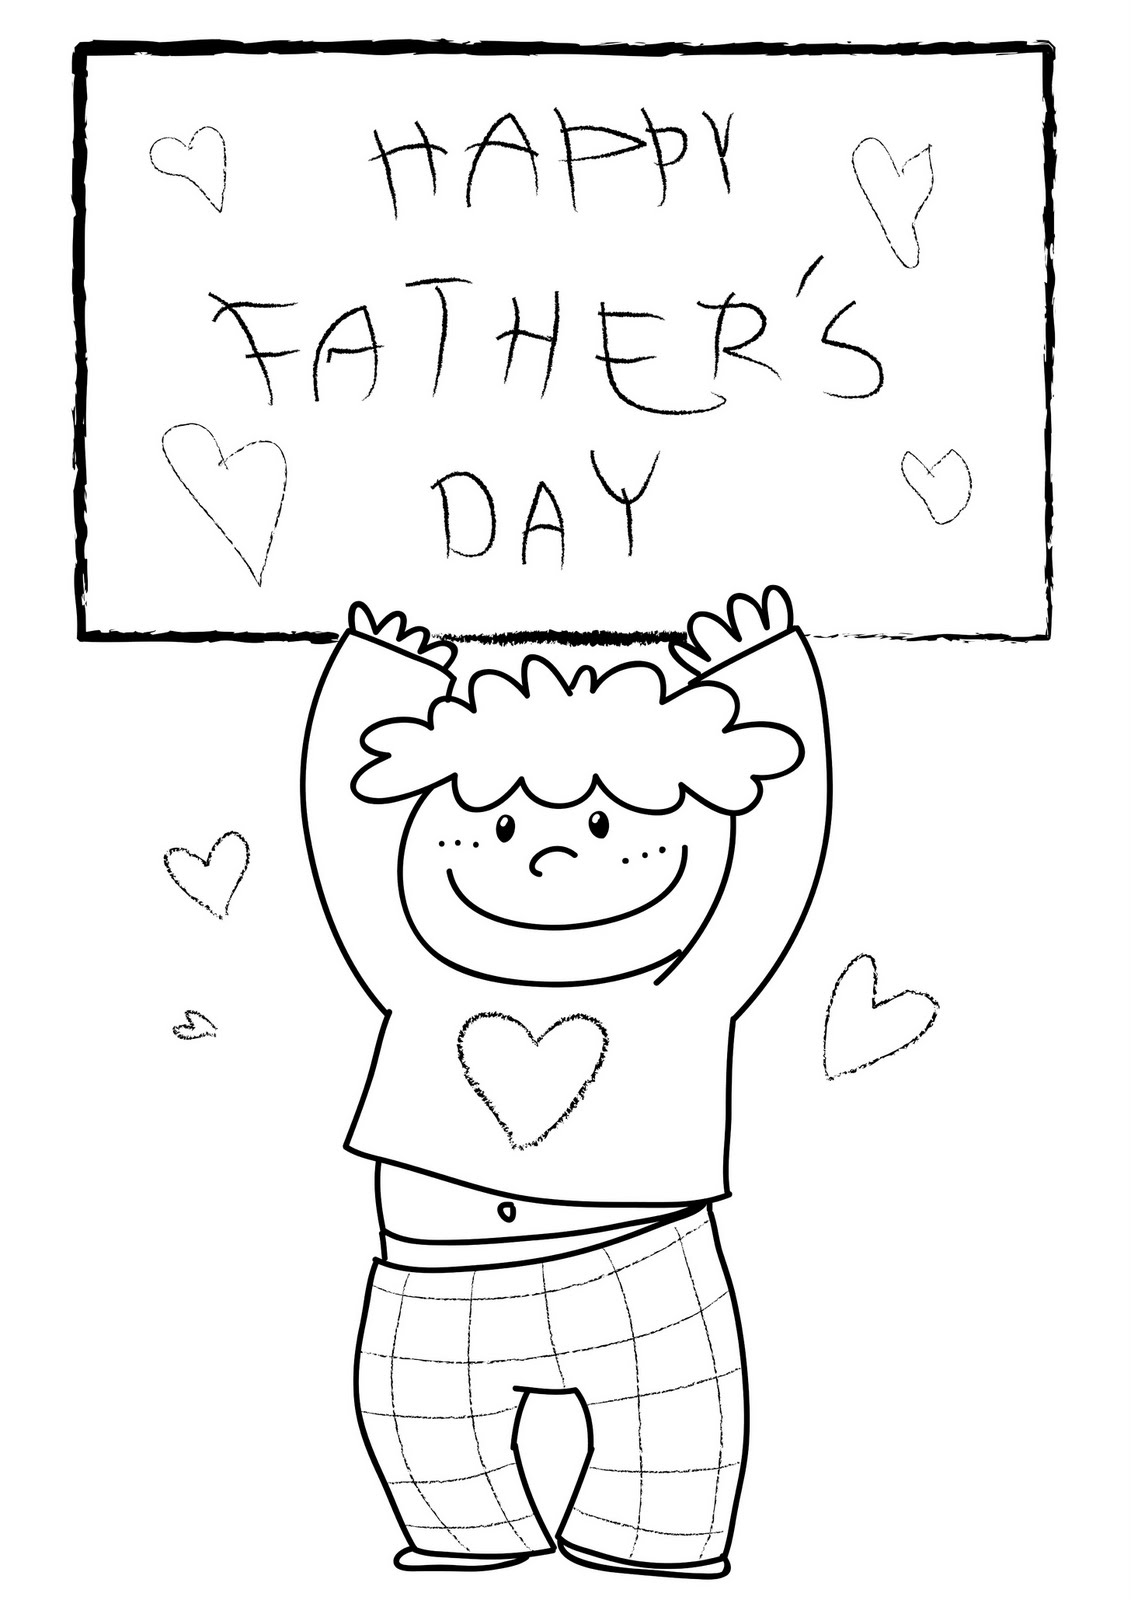 Fathers Day Coloring Pages For Kids